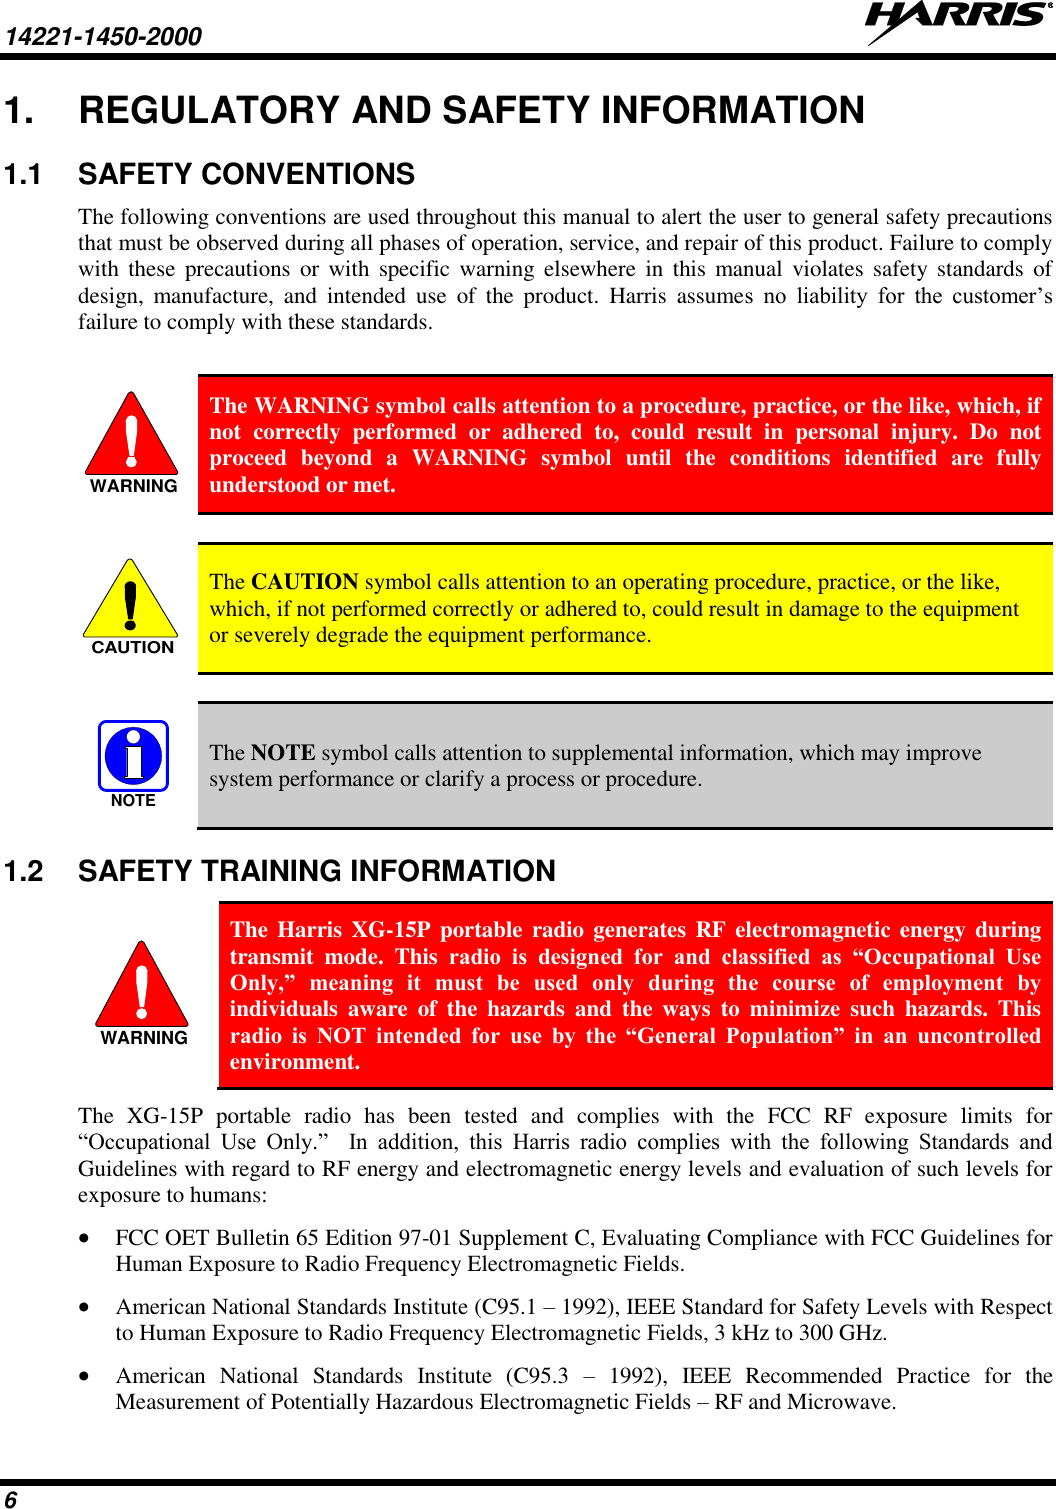 14221-1450-2000   6 1.  REGULATORY AND SAFETY INFORMATION 1.1  SAFETY CONVENTIONS The following conventions are used throughout this manual to alert the user to general safety precautions that must be observed during all phases of operation, service, and repair of this product. Failure to comply with  these  precautions  or  with  specific  warning  elsewhere  in  this  manual violates  safety standards of design,  manufacture,  and  intended  use  of  the  product.  Harris  assumes  no  liability  for  the  customer’s failure to comply with these standards.   The WARNING symbol calls attention to a procedure, practice, or the like, which, if not  correctly  performed  or  adhered  to,  could  result  in  personal  injury.  Do  not proceed  beyond  a  WARNING  symbol  until  the  conditions  identified  are  fully understood or met.    The CAUTION symbol calls attention to an operating procedure, practice, or the like, which, if not performed correctly or adhered to, could result in damage to the equipment or severely degrade the equipment performance.    The NOTE symbol calls attention to supplemental information, which may improve system performance or clarify a process or procedure. 1.2  SAFETY TRAINING INFORMATION  The Harris XG-15P portable radio generates RF electromagnetic energy during transmit  mode.  This  radio  is  designed  for  and  classified  as  “Occupational  Use Only,”  meaning  it  must  be  used  only  during  the  course  of  employment  by individuals  aware  of  the  hazards  and  the  ways  to  minimize  such  hazards.  This radio  is  NOT  intended  for  use  by  the  “General  Population”  in  an  uncontrolled environment. The  XG-15P  portable  radio  has  been  tested  and  complies  with  the  FCC  RF  exposure  limits  for “Occupational  Use  Only.”    In  addition,  this  Harris  radio  complies  with  the  following  Standards  and Guidelines with regard to RF energy and electromagnetic energy levels and evaluation of such levels for exposure to humans:  FCC OET Bulletin 65 Edition 97-01 Supplement C, Evaluating Compliance with FCC Guidelines for Human Exposure to Radio Frequency Electromagnetic Fields.  American National Standards Institute (C95.1 – 1992), IEEE Standard for Safety Levels with Respect to Human Exposure to Radio Frequency Electromagnetic Fields, 3 kHz to 300 GHz.  American  National  Standards  Institute  (C95.3  –  1992),  IEEE  Recommended  Practice  for  the Measurement of Potentially Hazardous Electromagnetic Fields – RF and Microwave. WARNINGCAUTIONNOTEWARNING